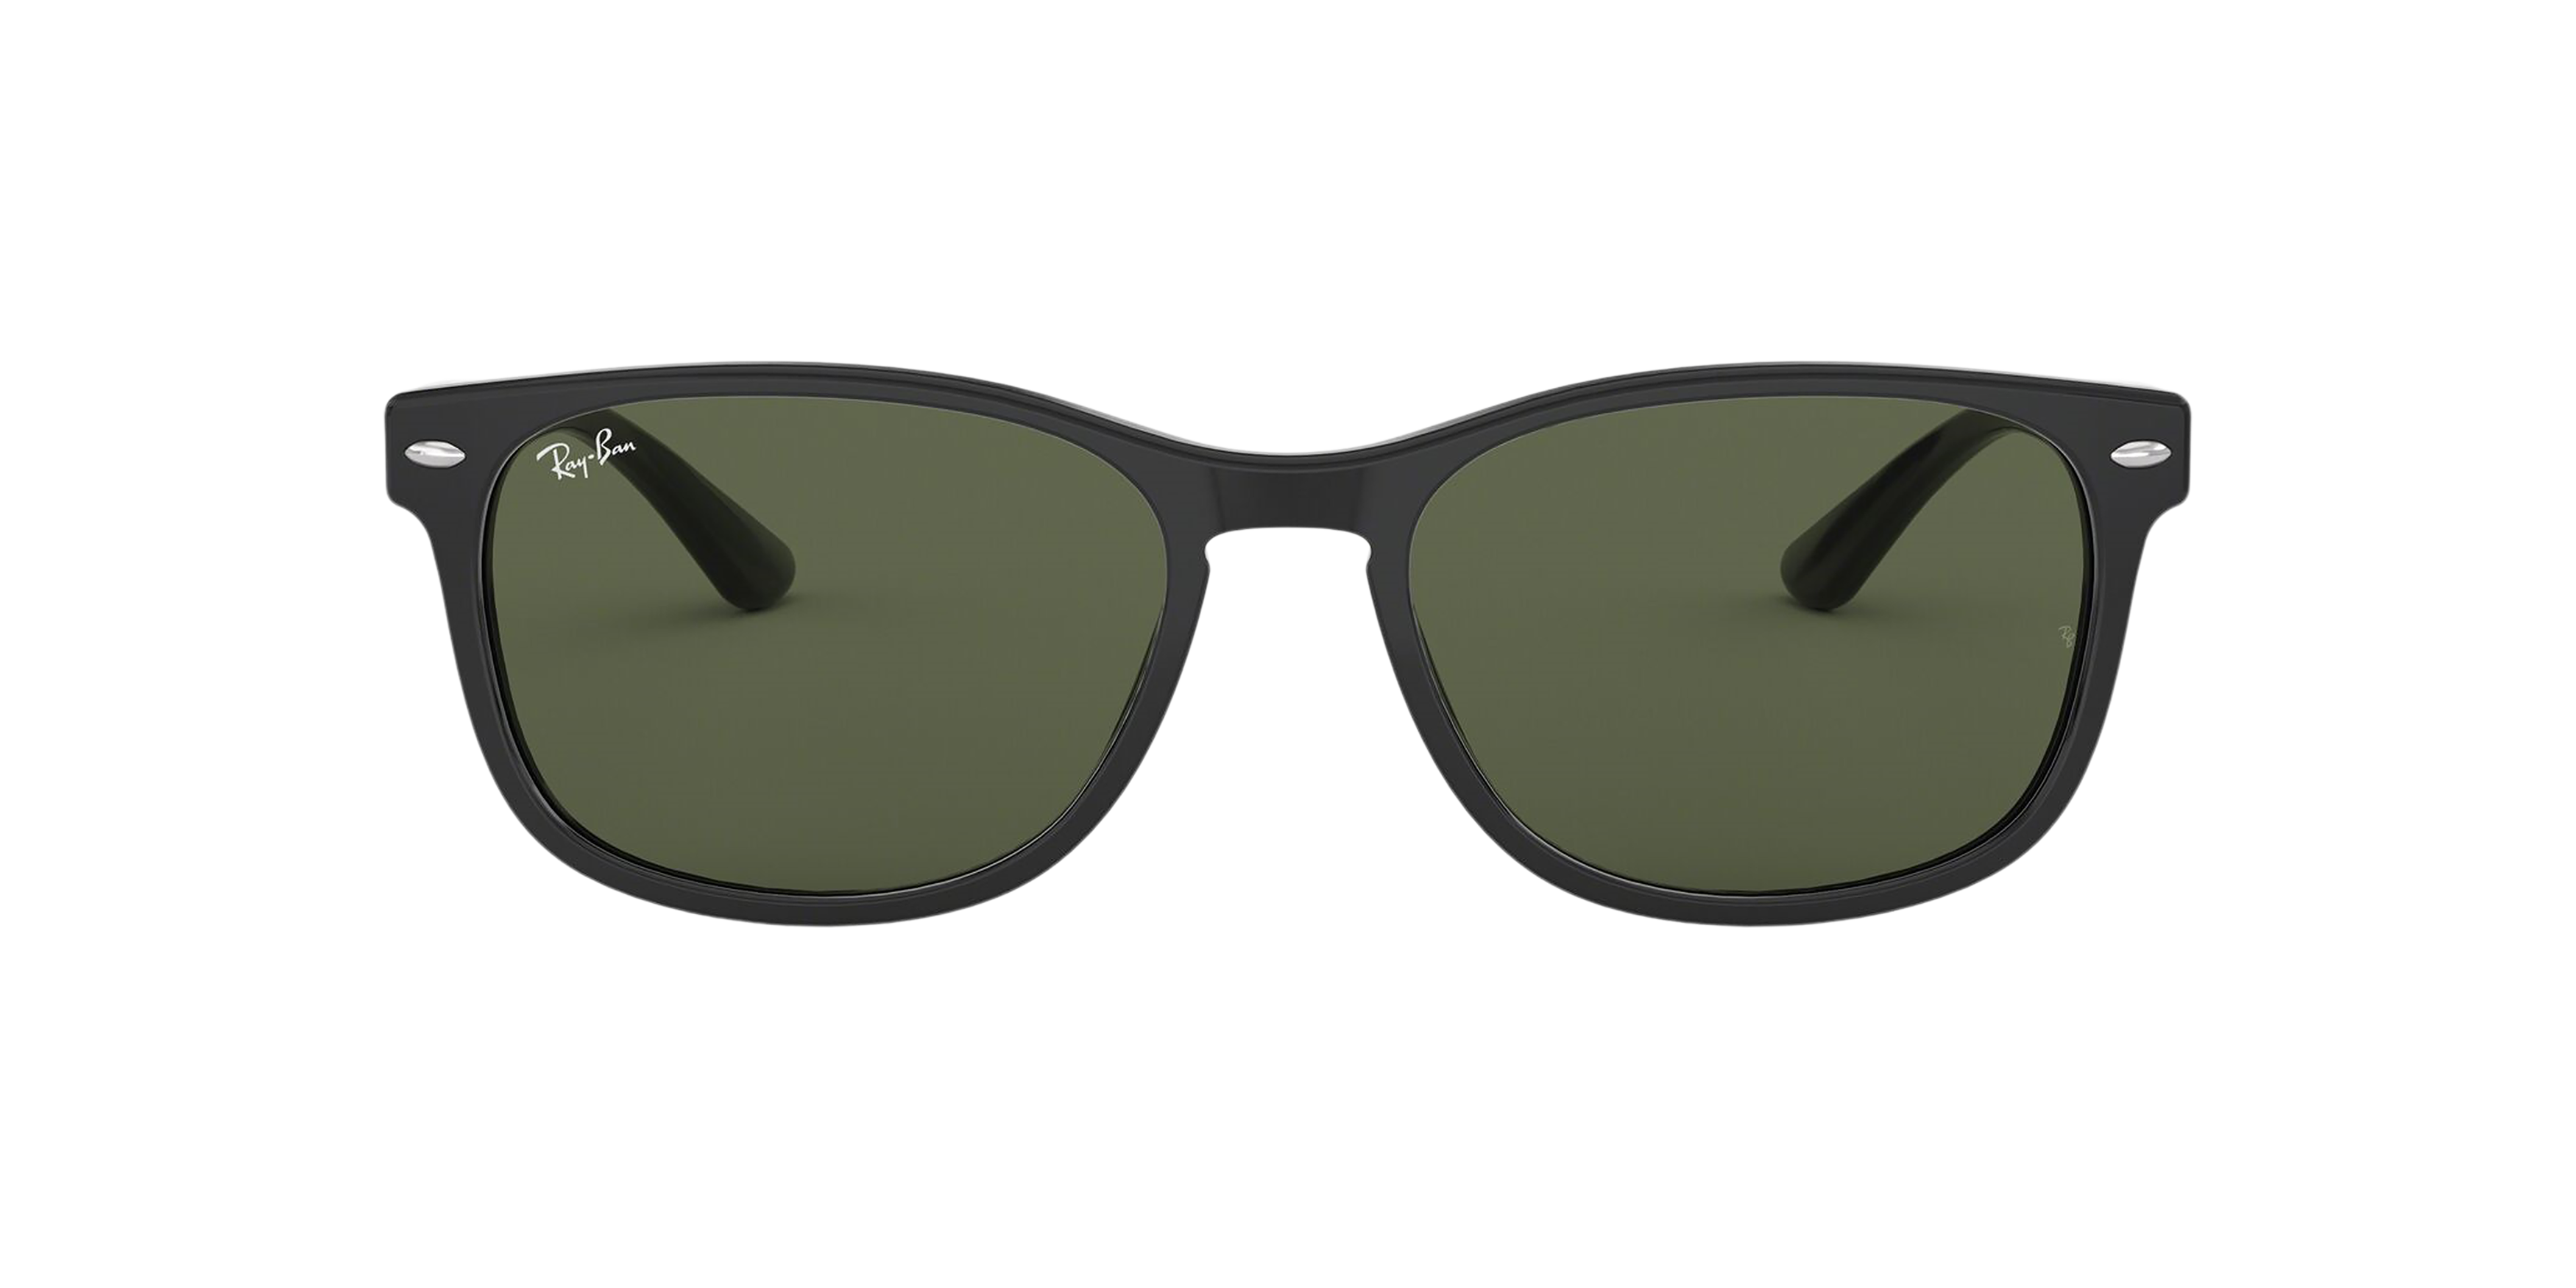 [products.image.front] Ray-Ban RB2184 901/31